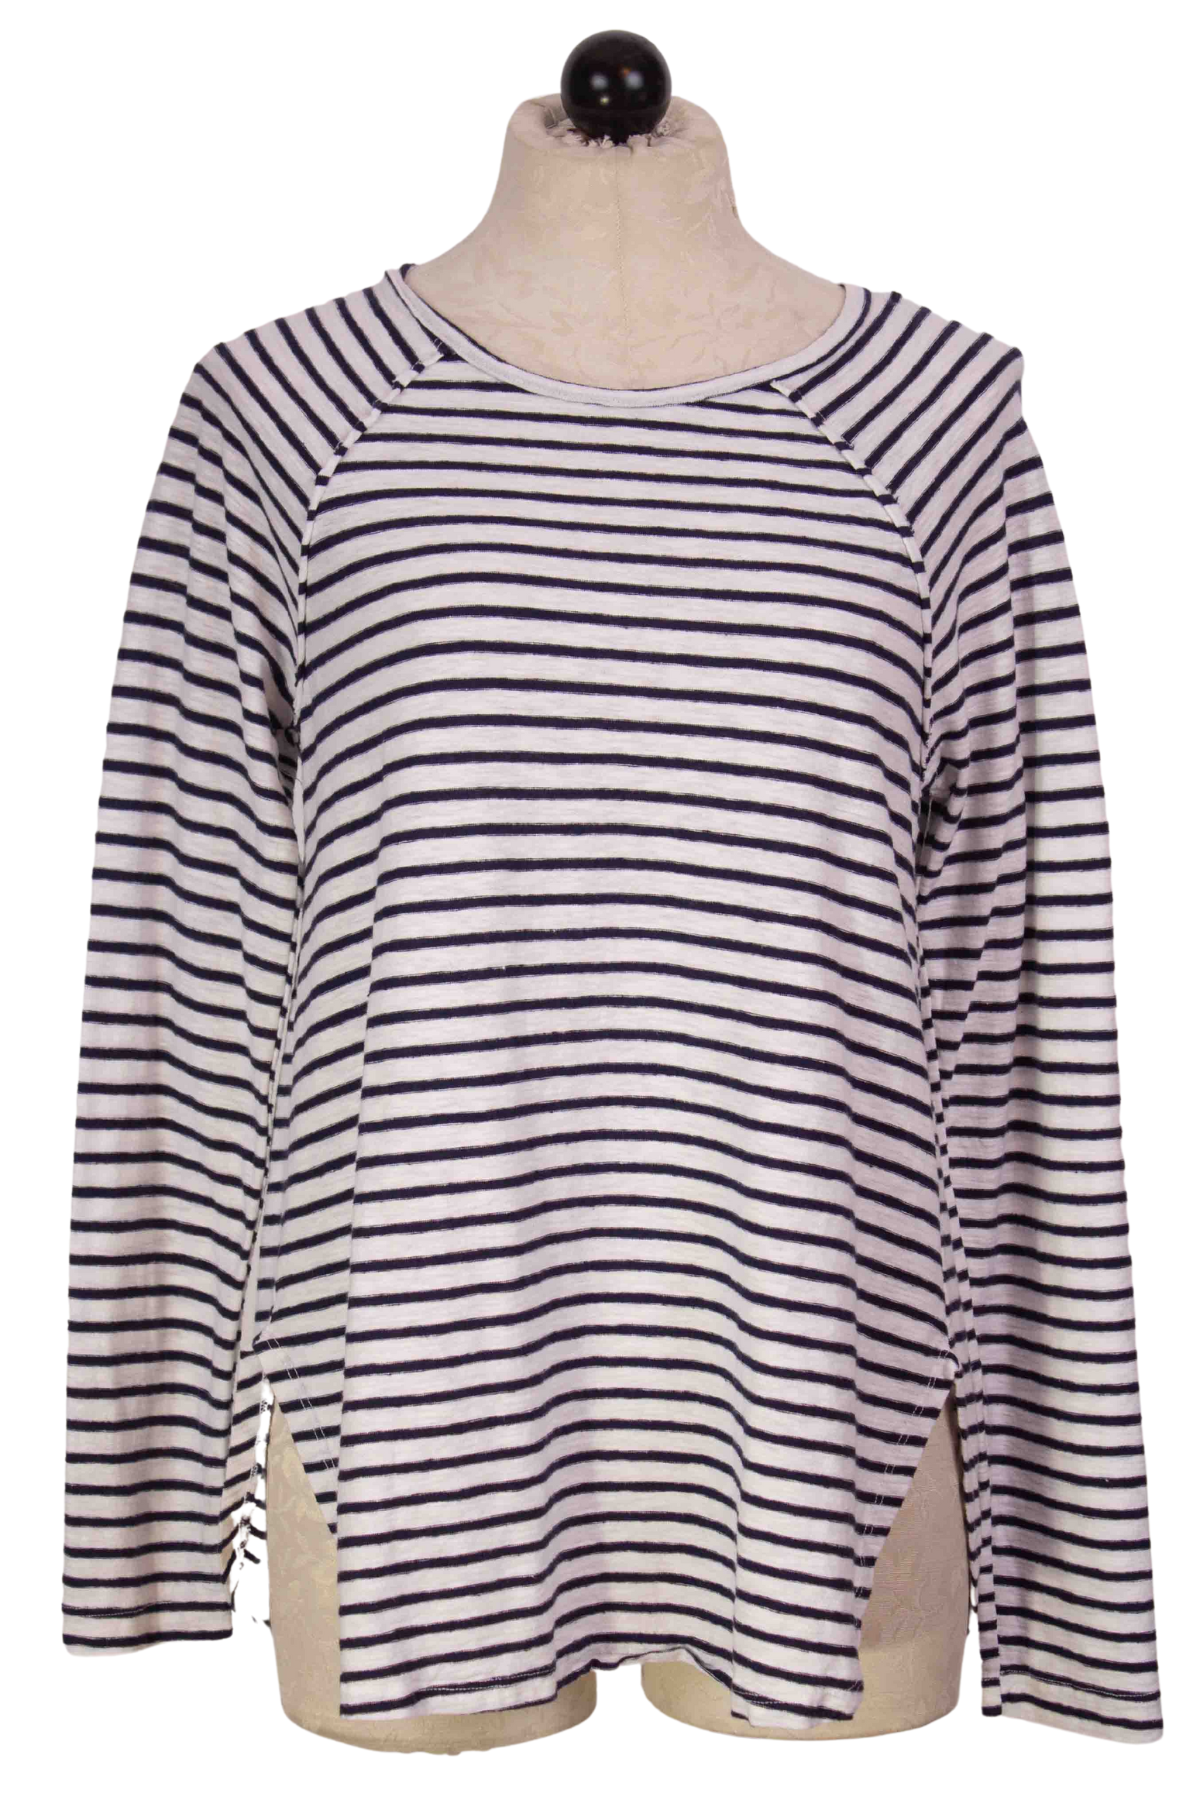 Striped Ruched Back Top by Cut Loose